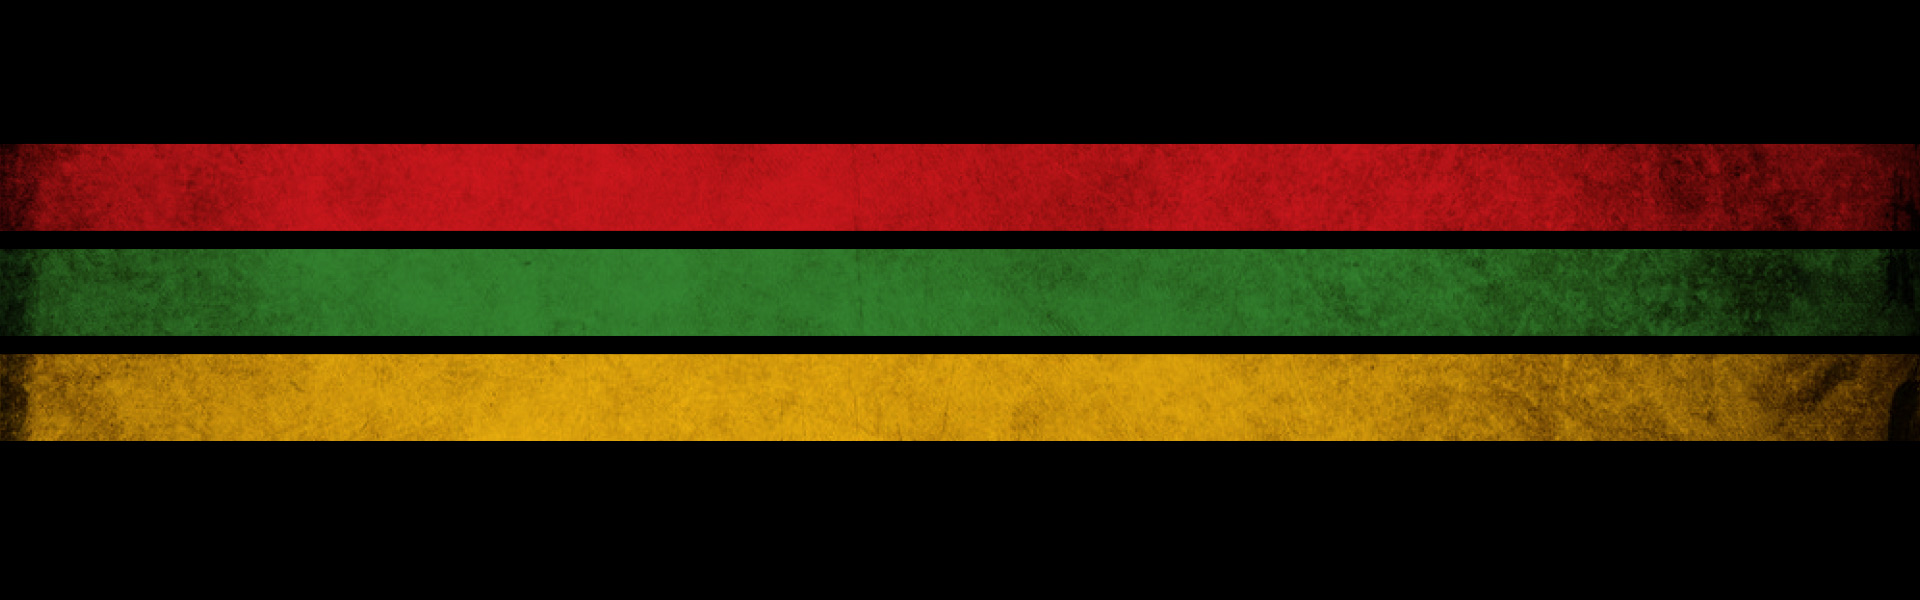 Illustration of a red, green and yellow stripe on a black background